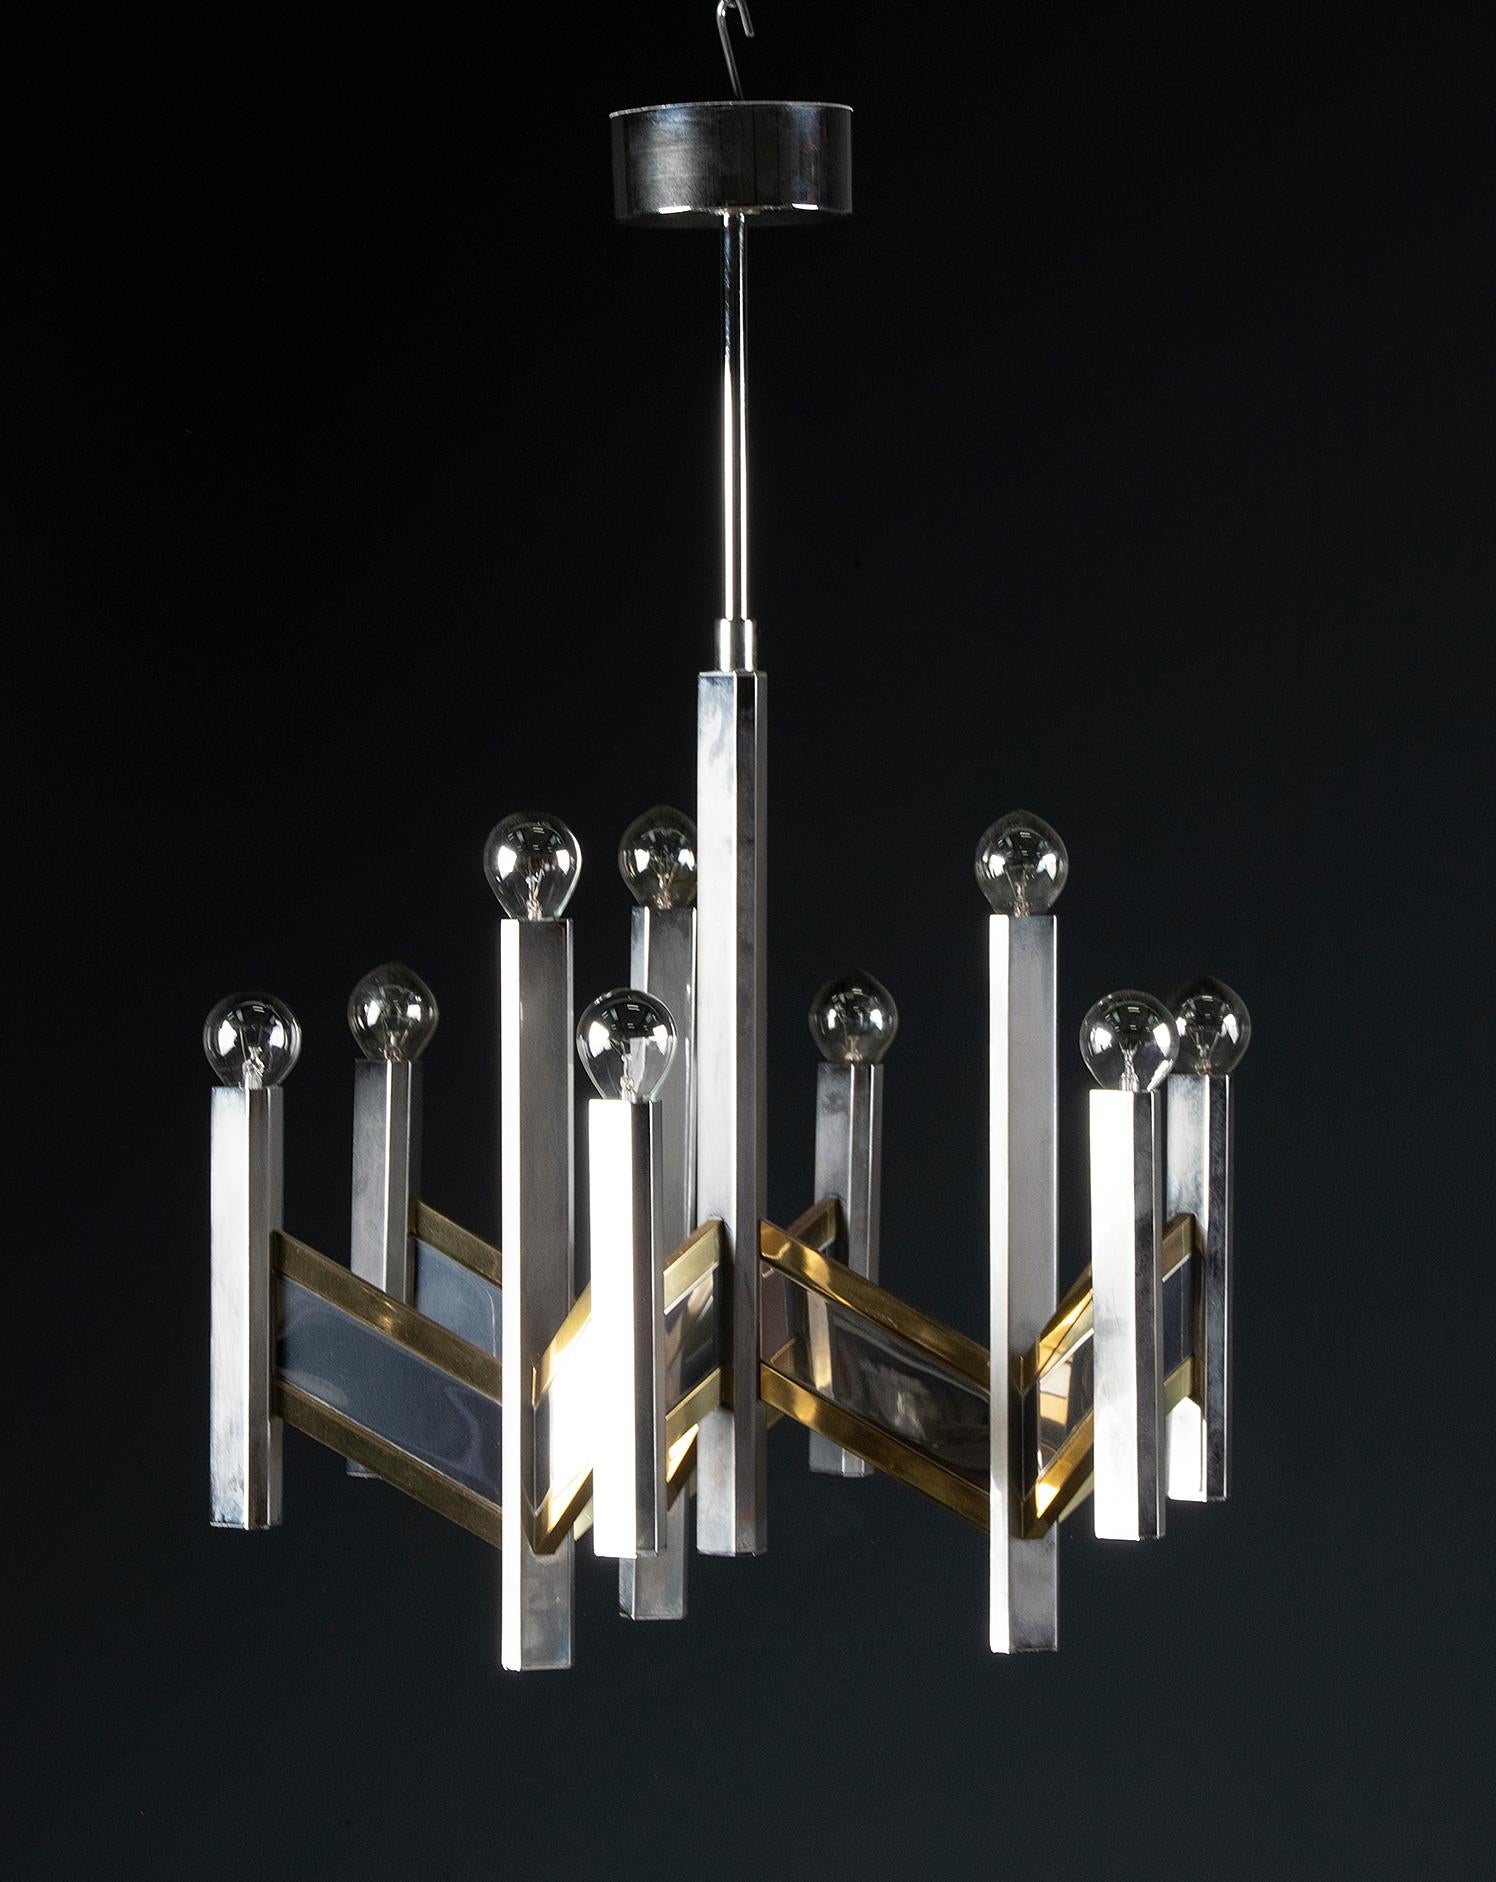 Beautiful vintage chandelier from the Italian brand Sciolari. The lamp has a special design with clean lines and many angles. The lamp is made of stainless steel and brass. The ceiling piece contains an original Sciolari label. The lamp has a total